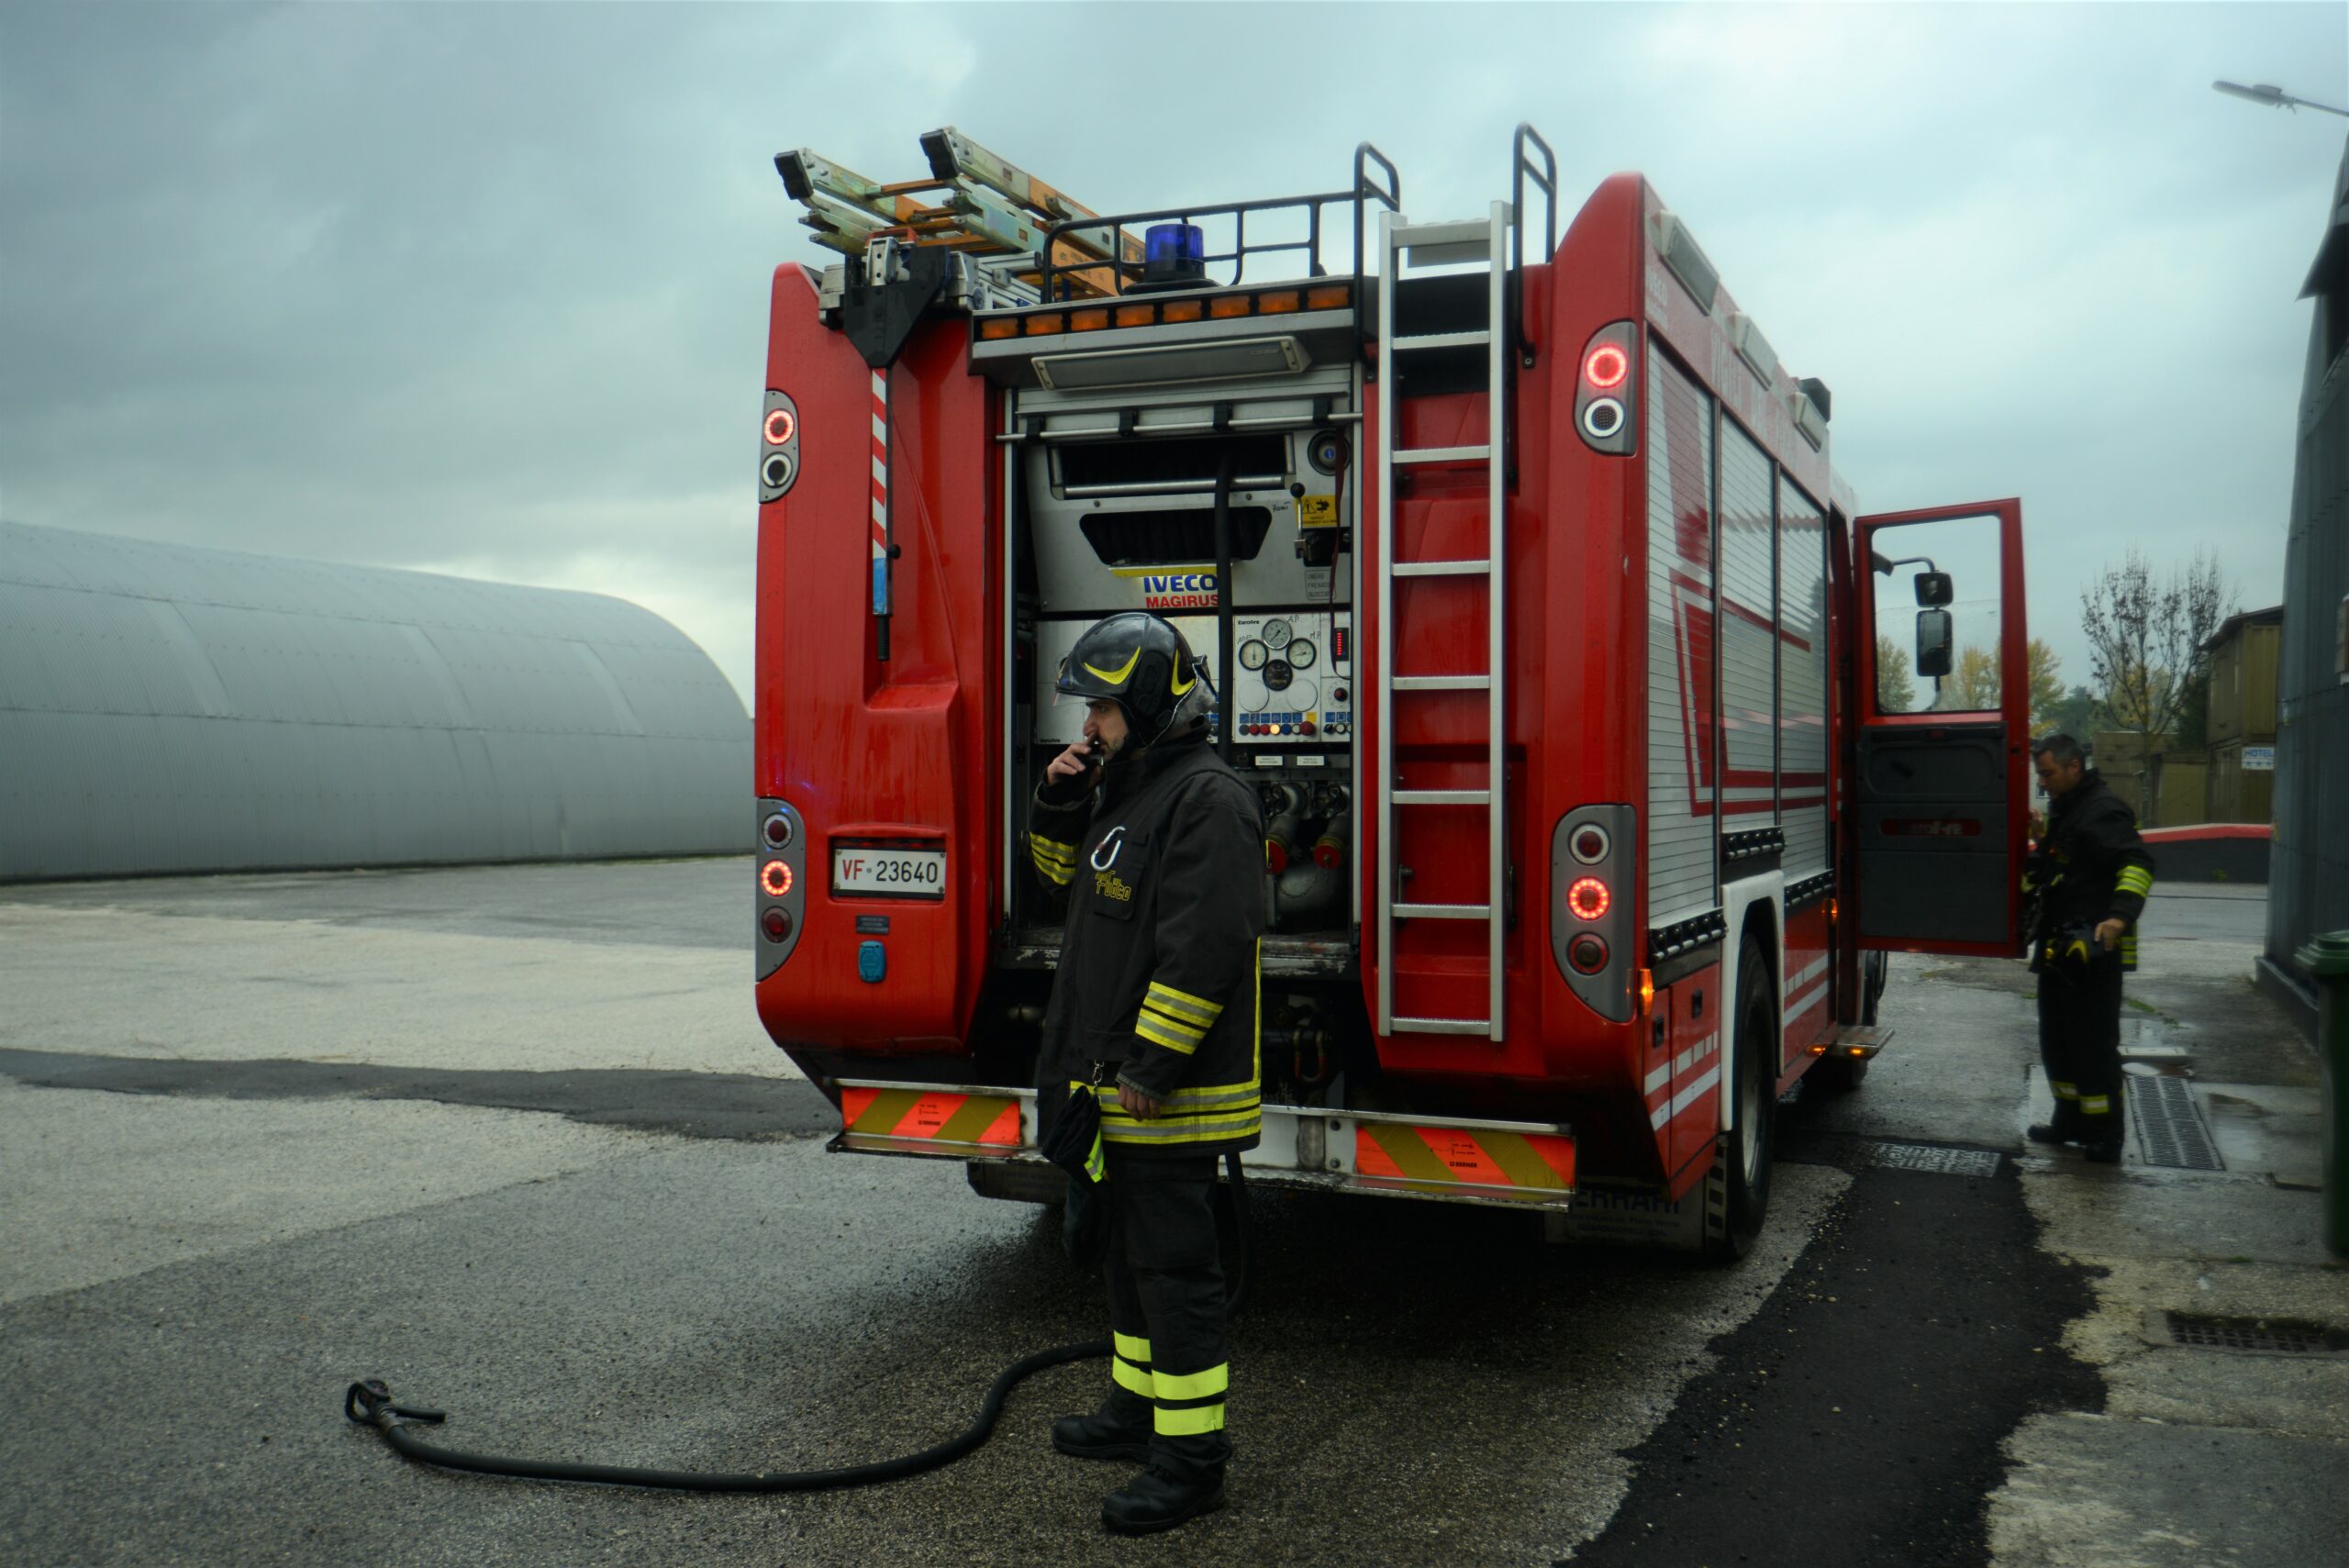 Two firefighters (men) wearing their uniform. One is standing in front and is talking on a radio set. Another firefighter is closing the door of the firetruck.